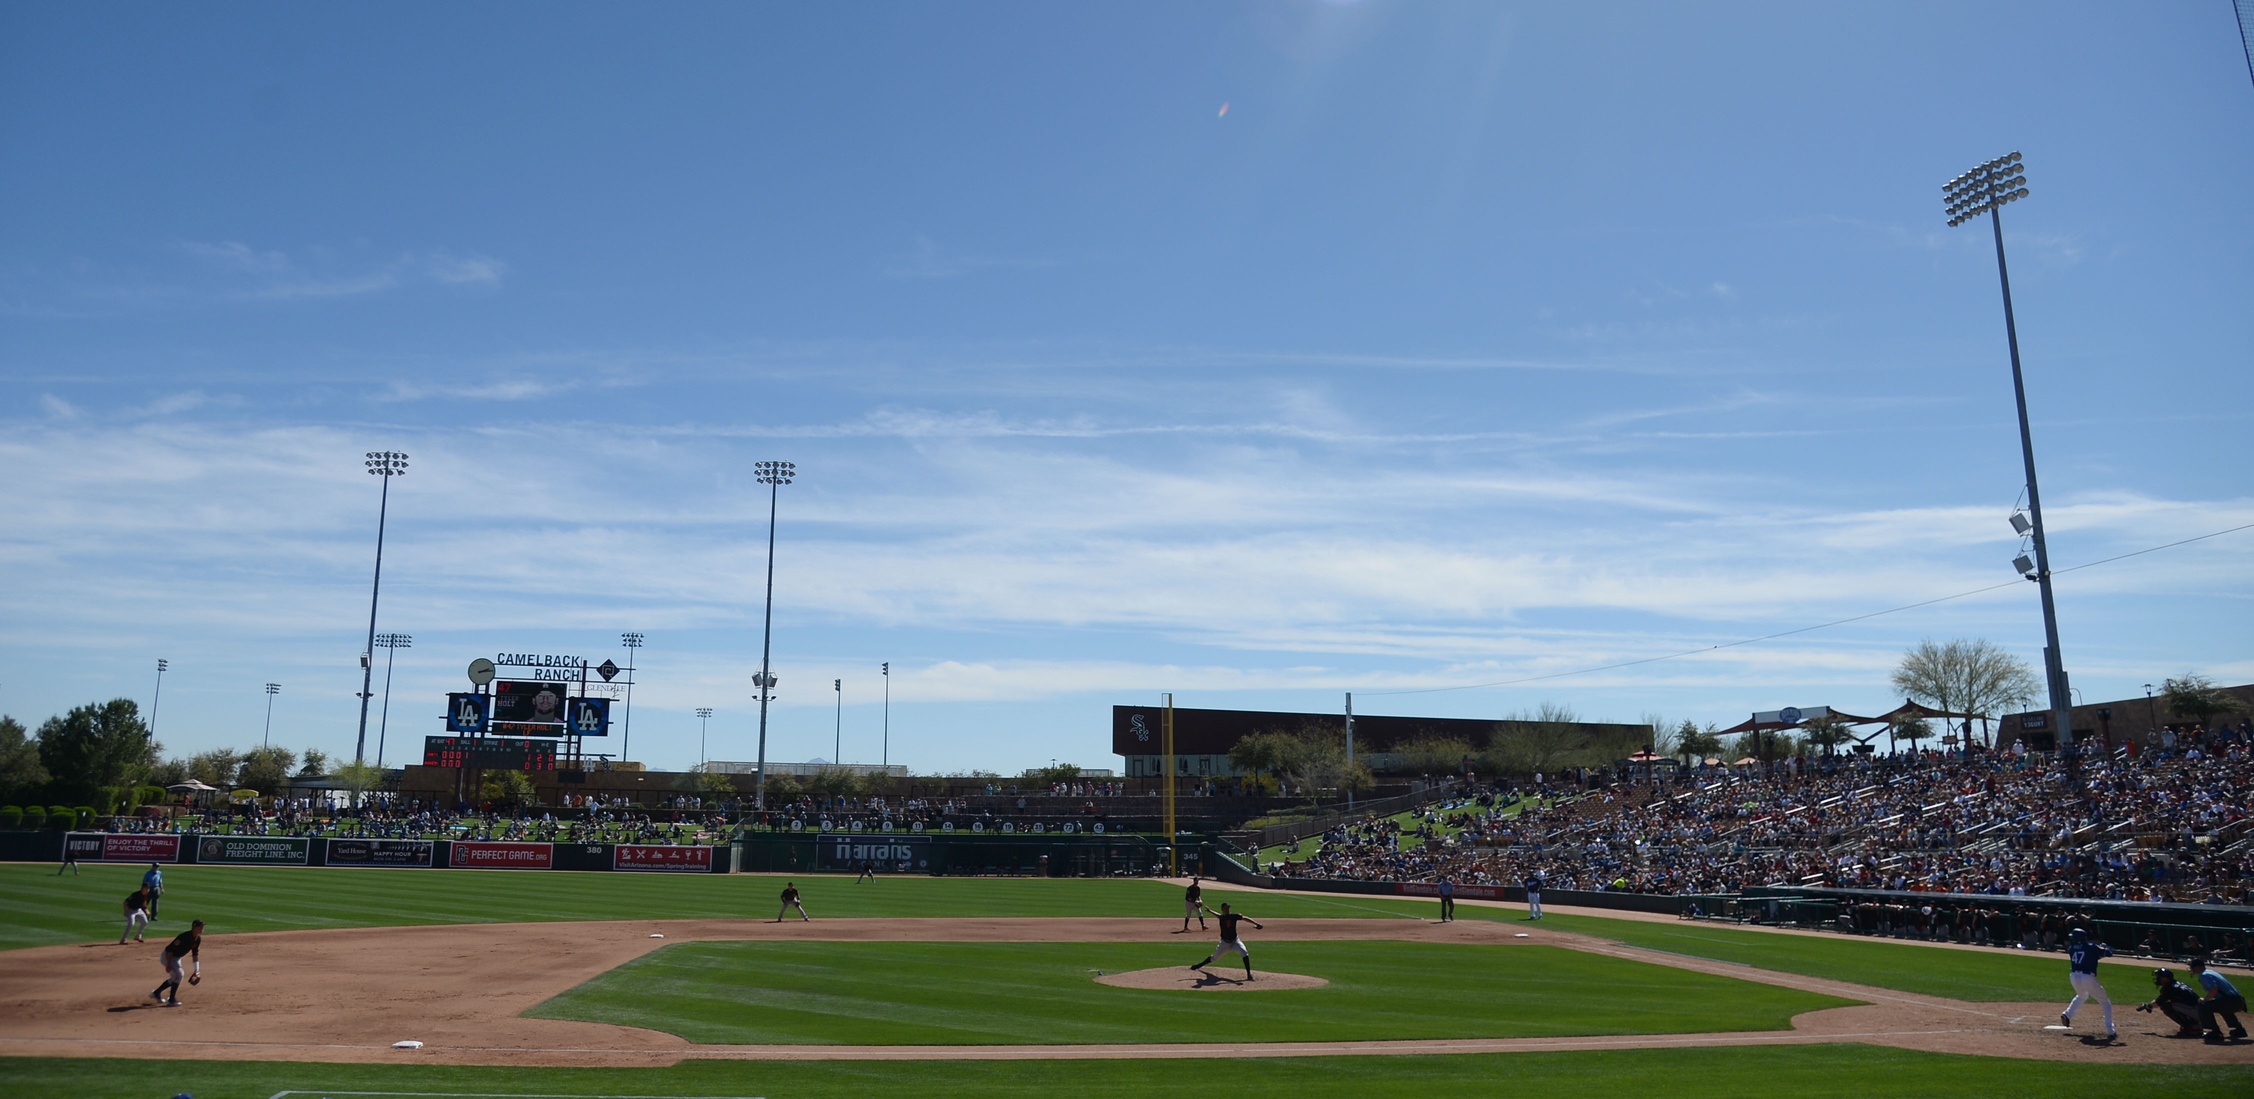 MLB spring training through the eyes of the WAGs